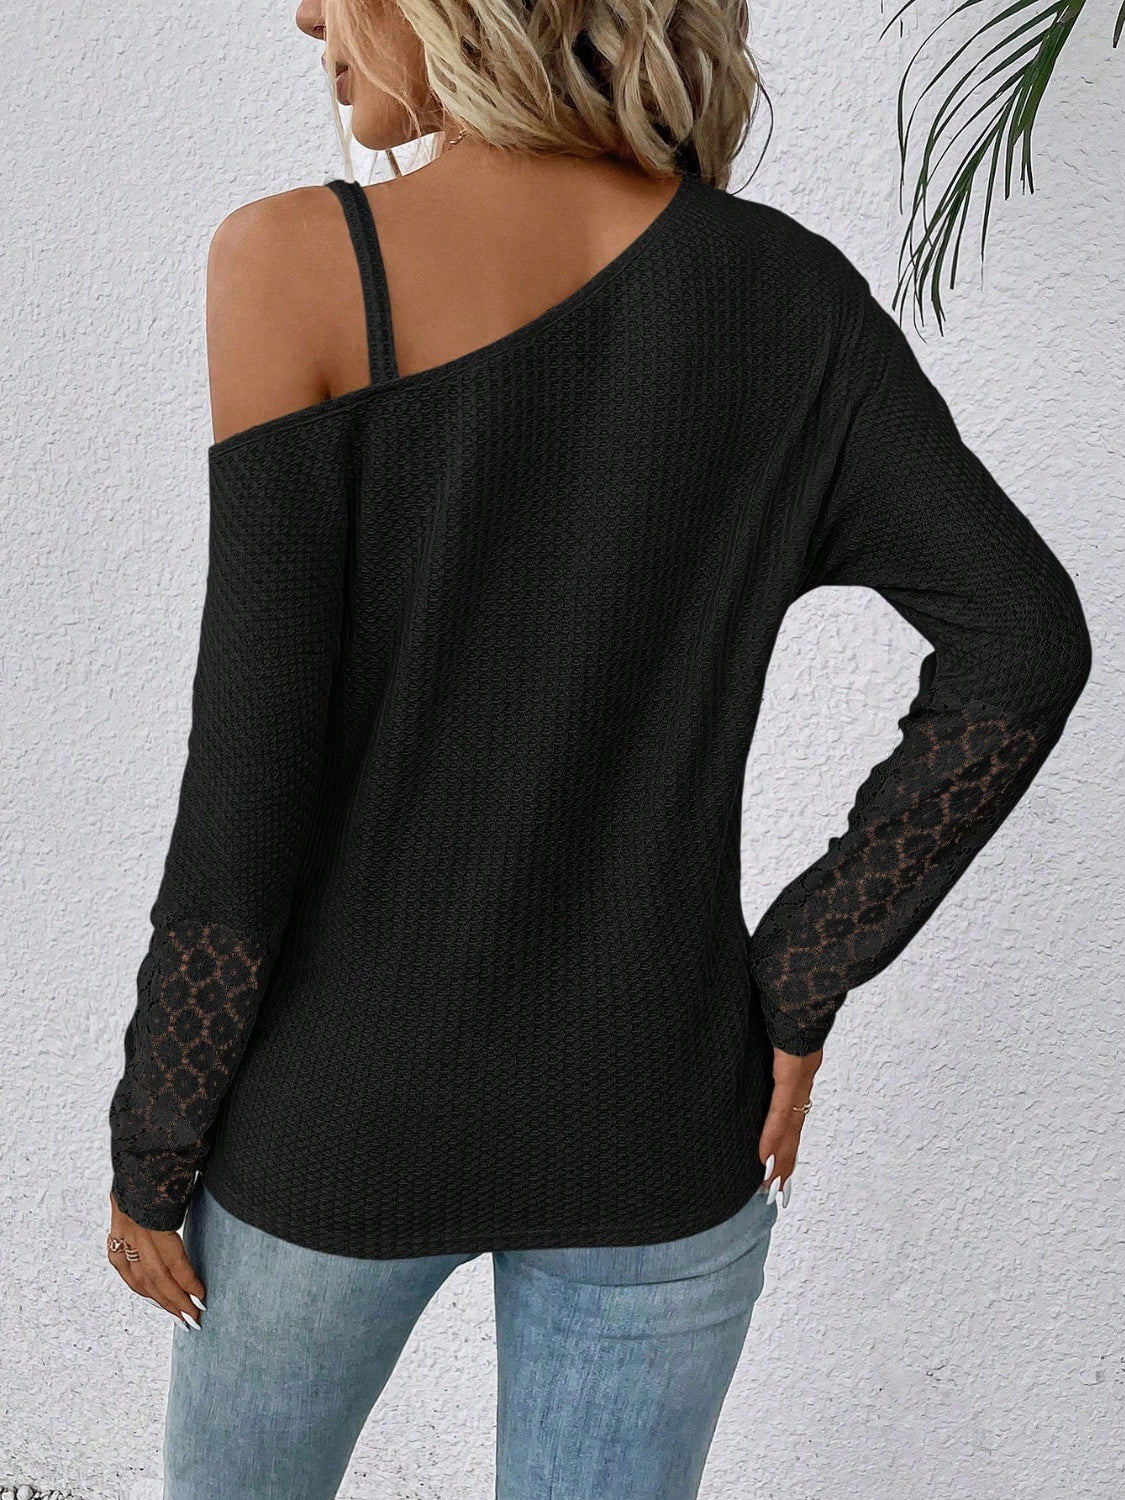 Lace Detail Asymmetrical Neck Long Sleeve T-Shirt Black / S Apparel and Accessories